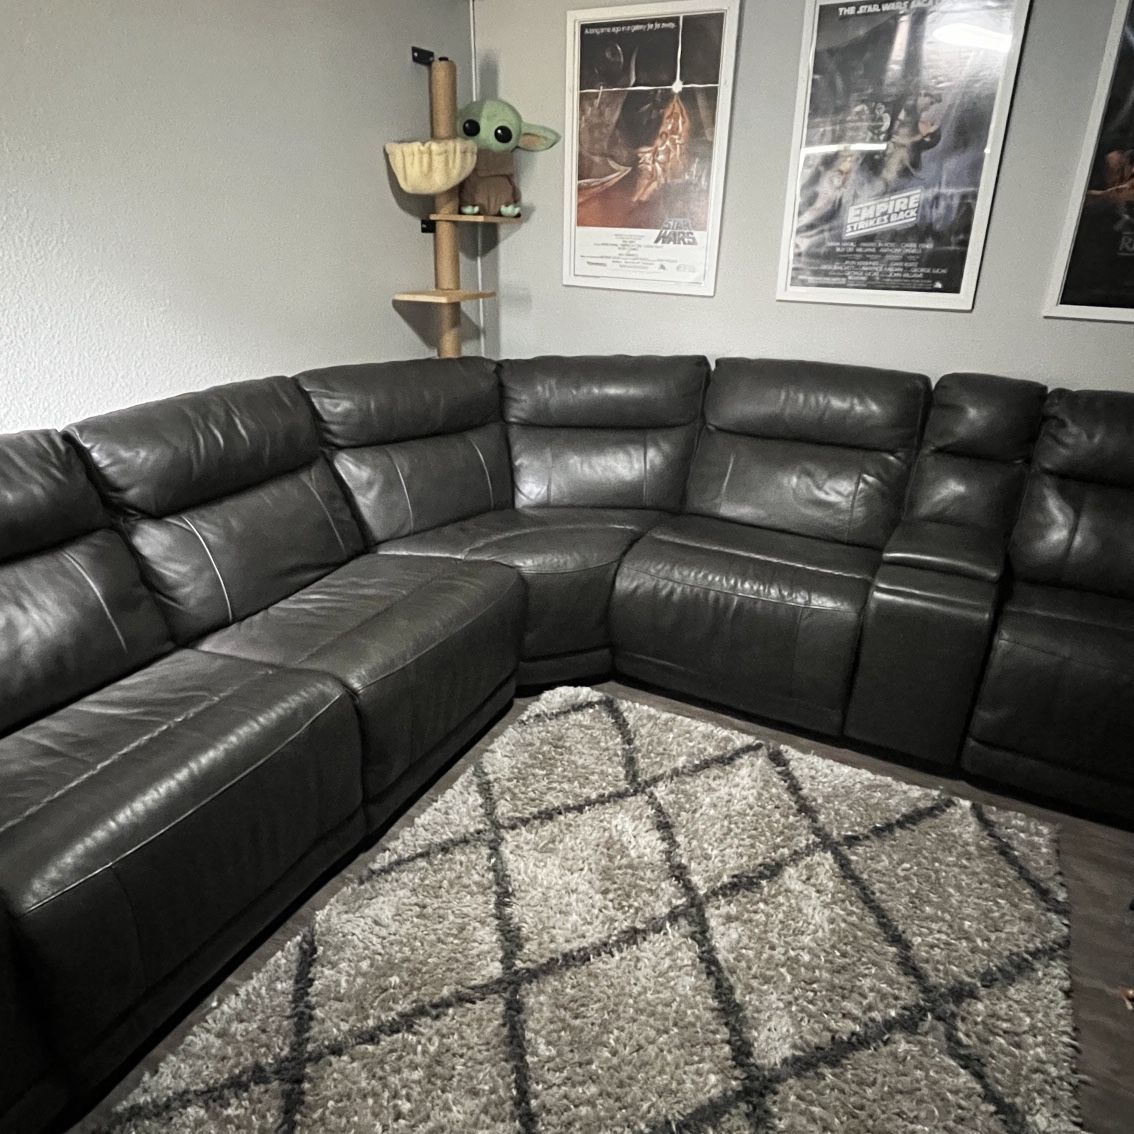 6 Piece Reclining Sectional Couch From Costco